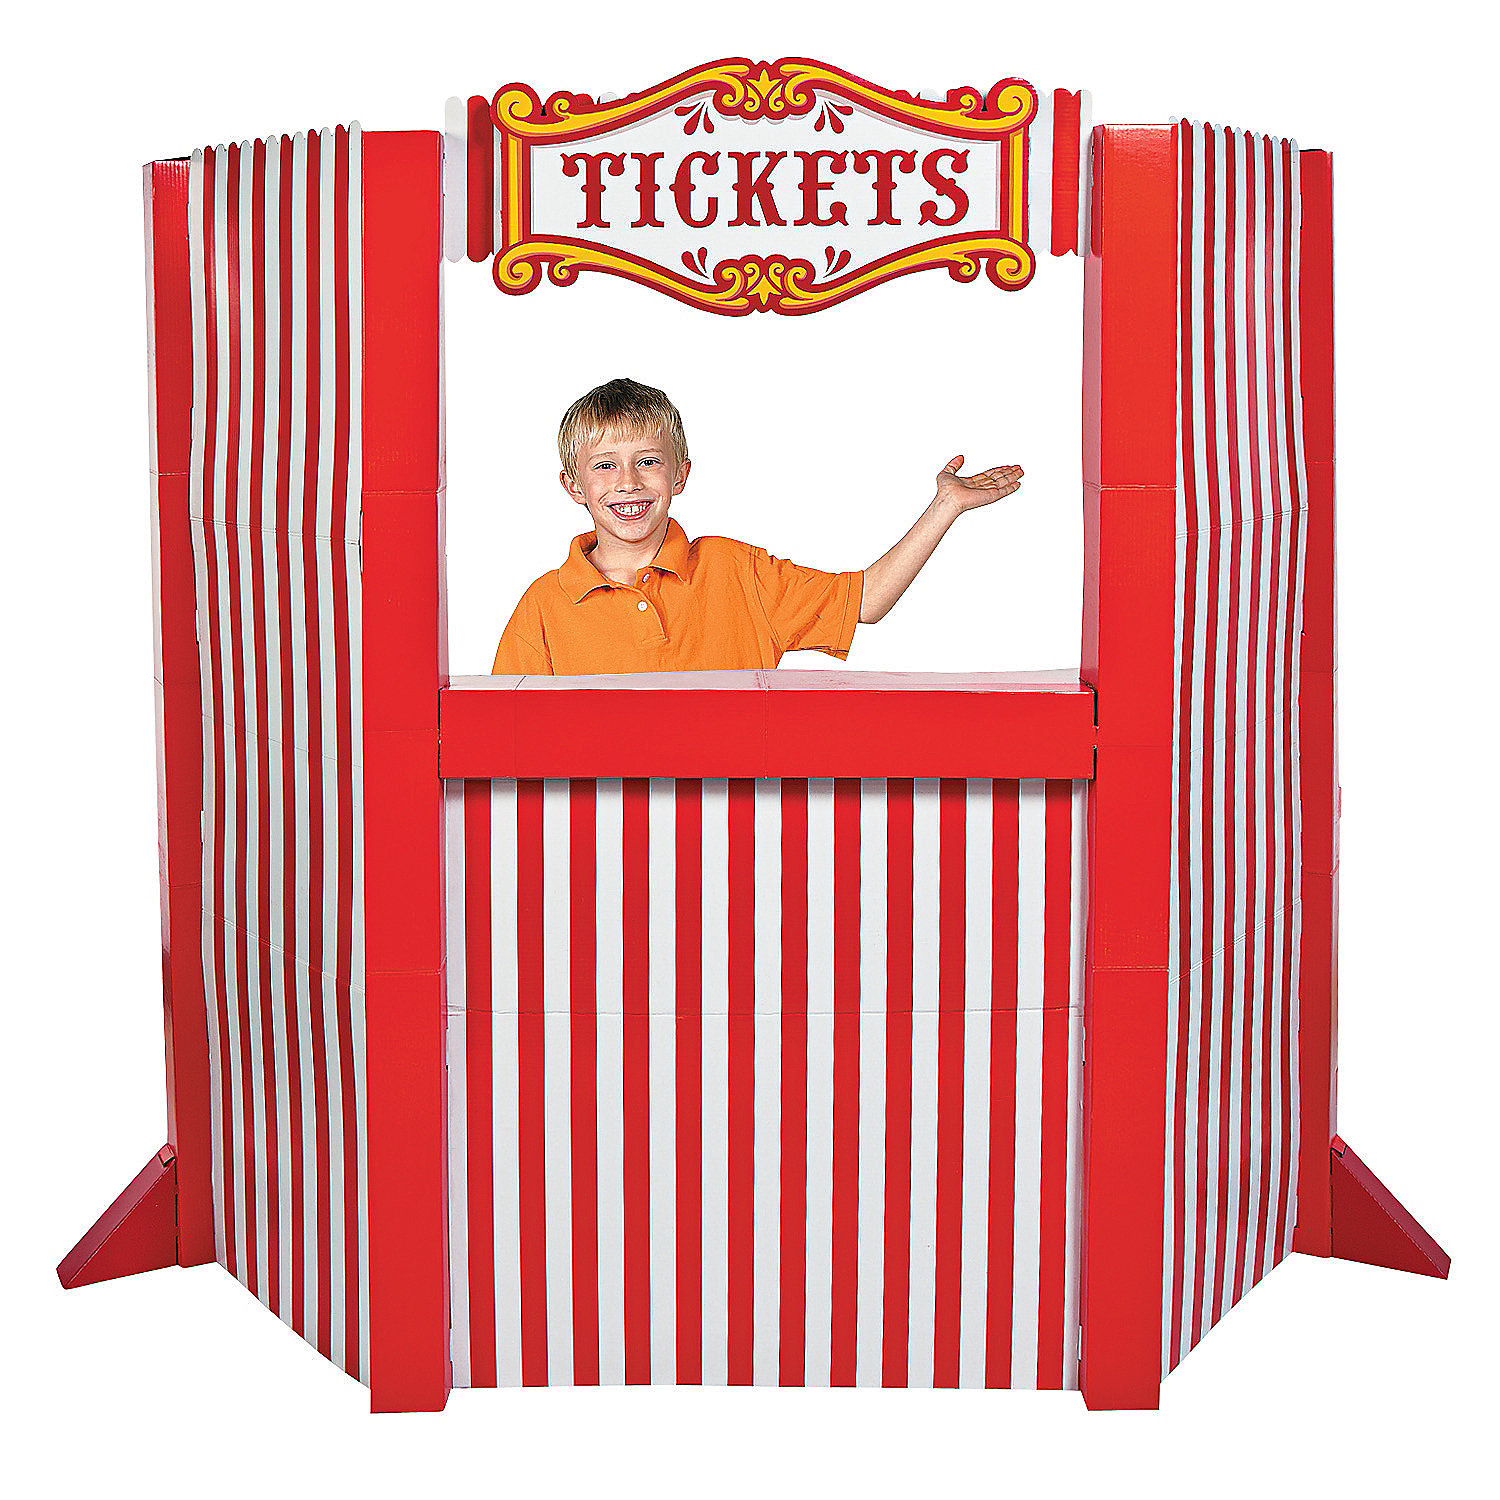 Carnival Ticket Booth drawing free image download